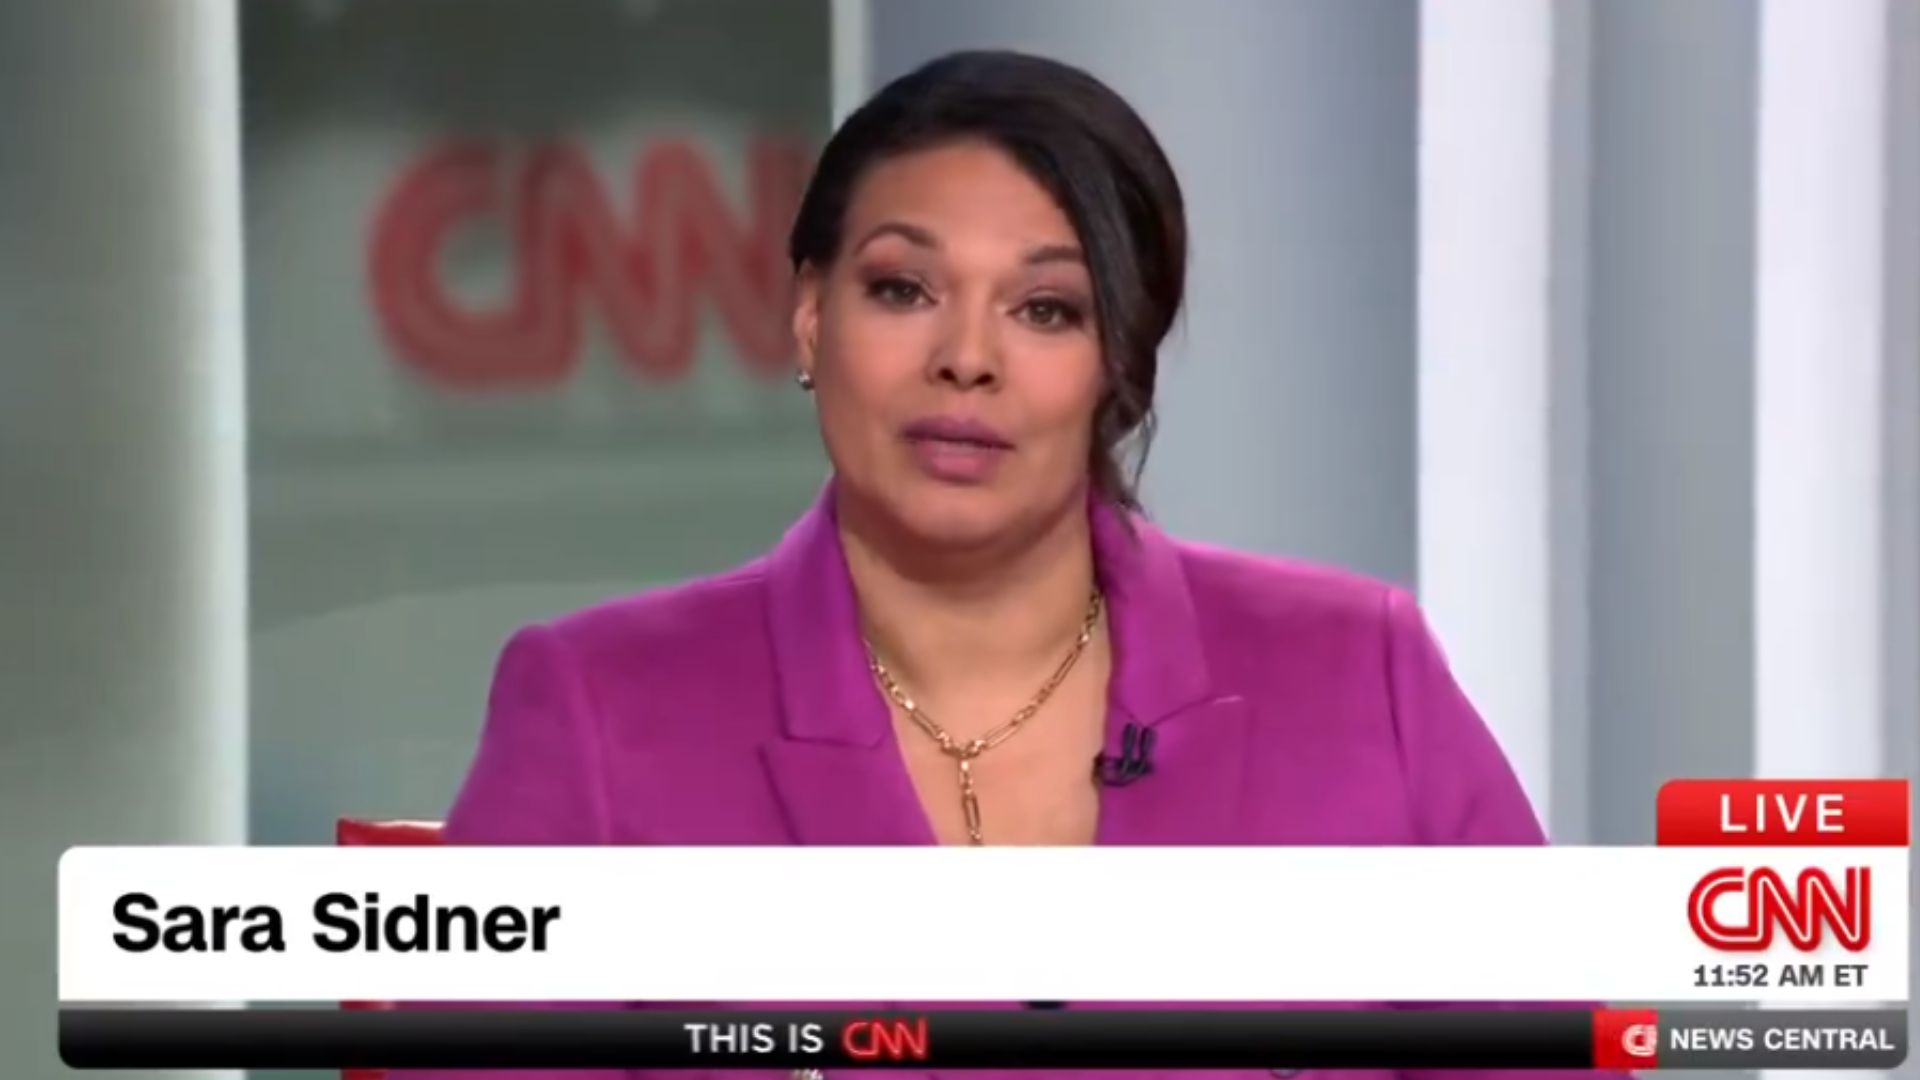 CNN Anchor Sara Sidner Courageously Shares Battle Against Stage 3 Breast Cancer On Live TV